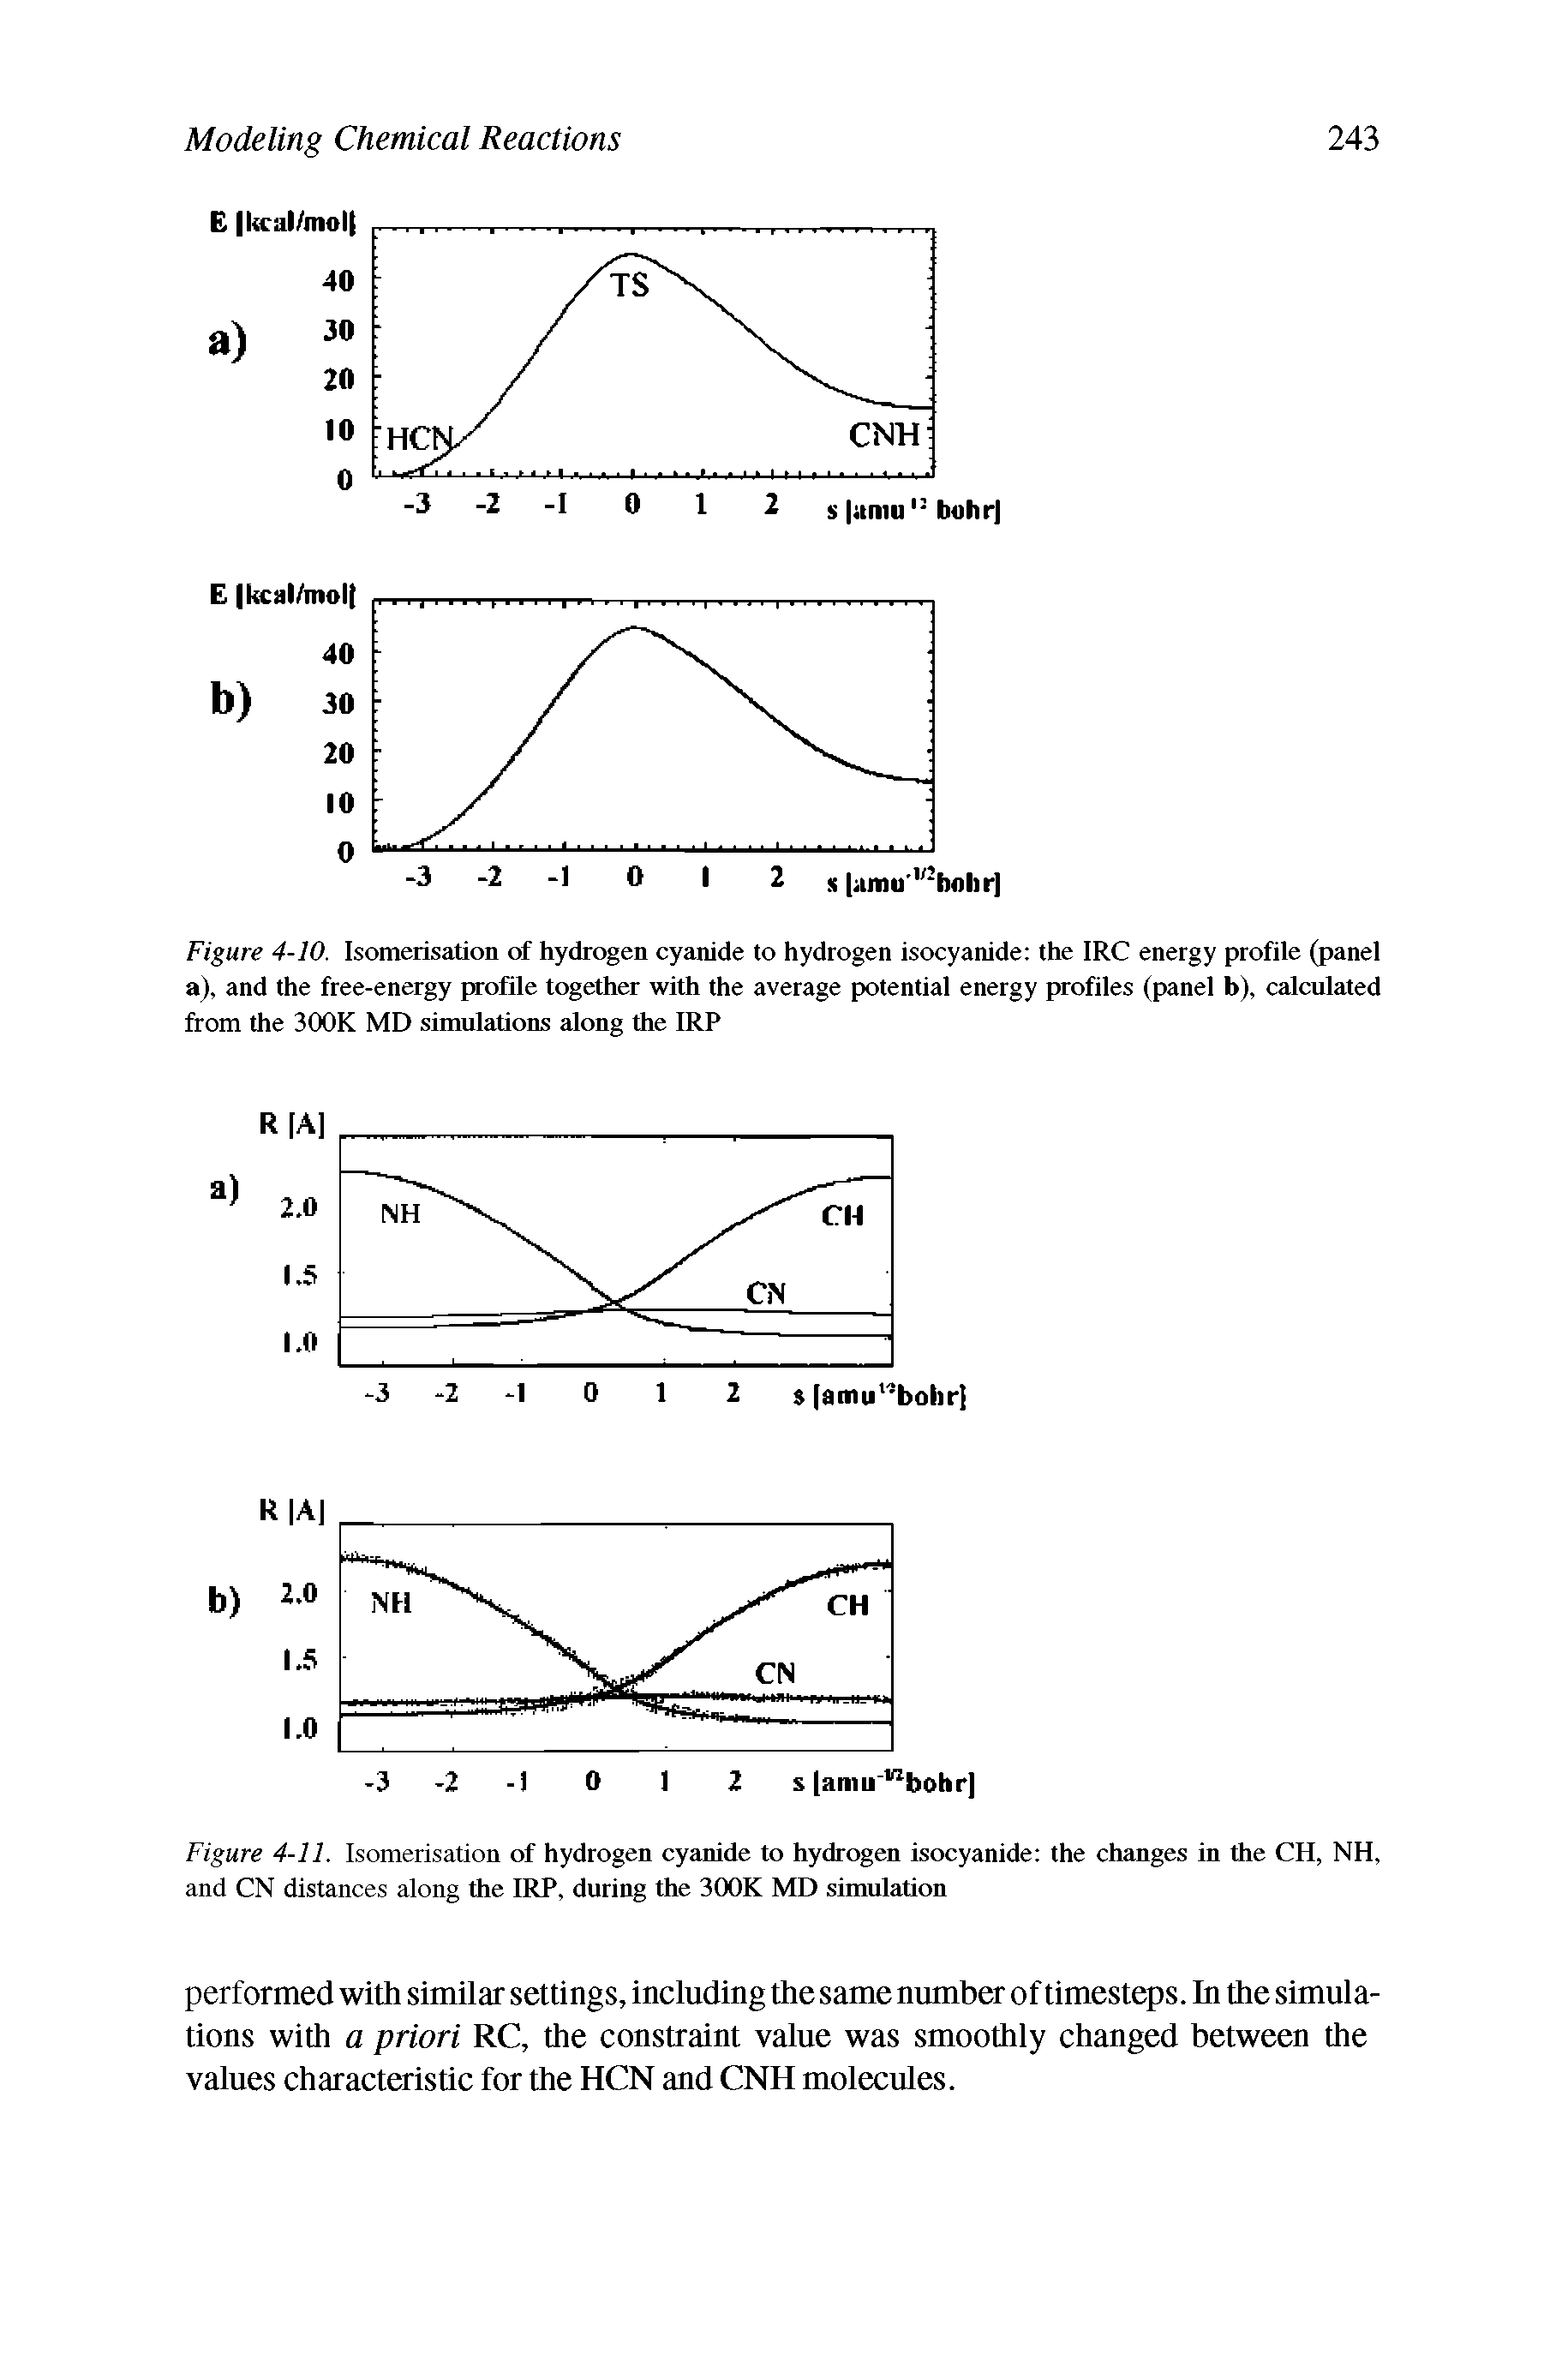 Figure 4-10. Isomerisation of hydrogen cyanide to hydrogen isocyanide the IRC energy profile (panel a), and the free-energy profile together with the average potential energy profiles (panel b), calculated from the 300K MD simulations along the IRP...